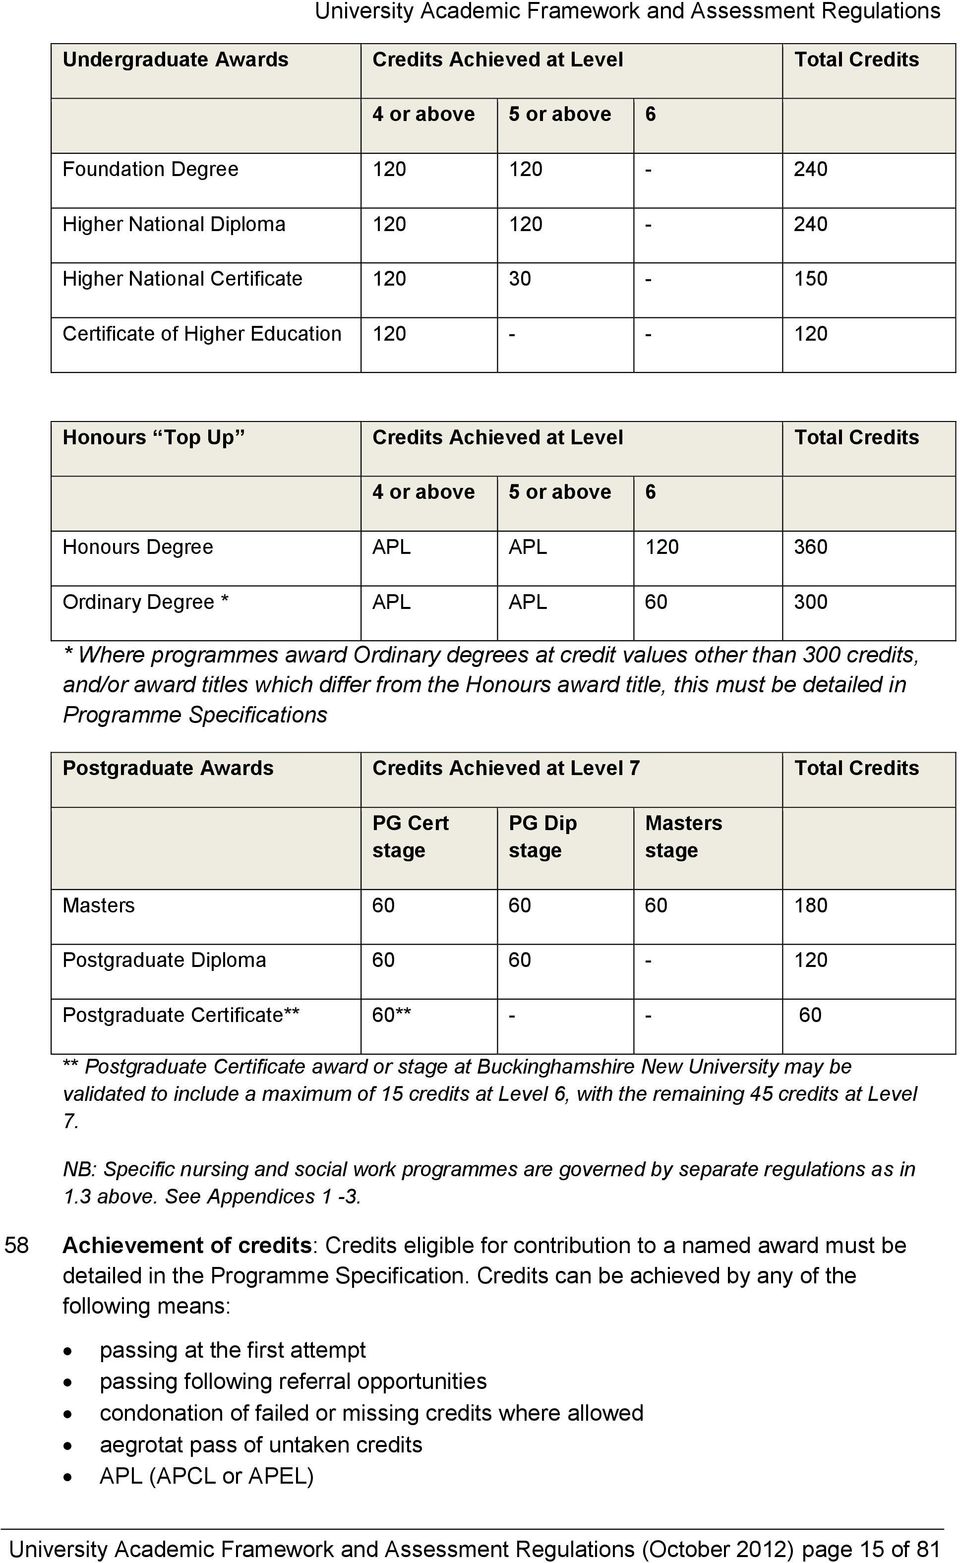 programmes award Ordinary degrees at credit values other than 300 credits, and/or award titles which differ from the Honours award title, this must be detailed in Programme Specifications